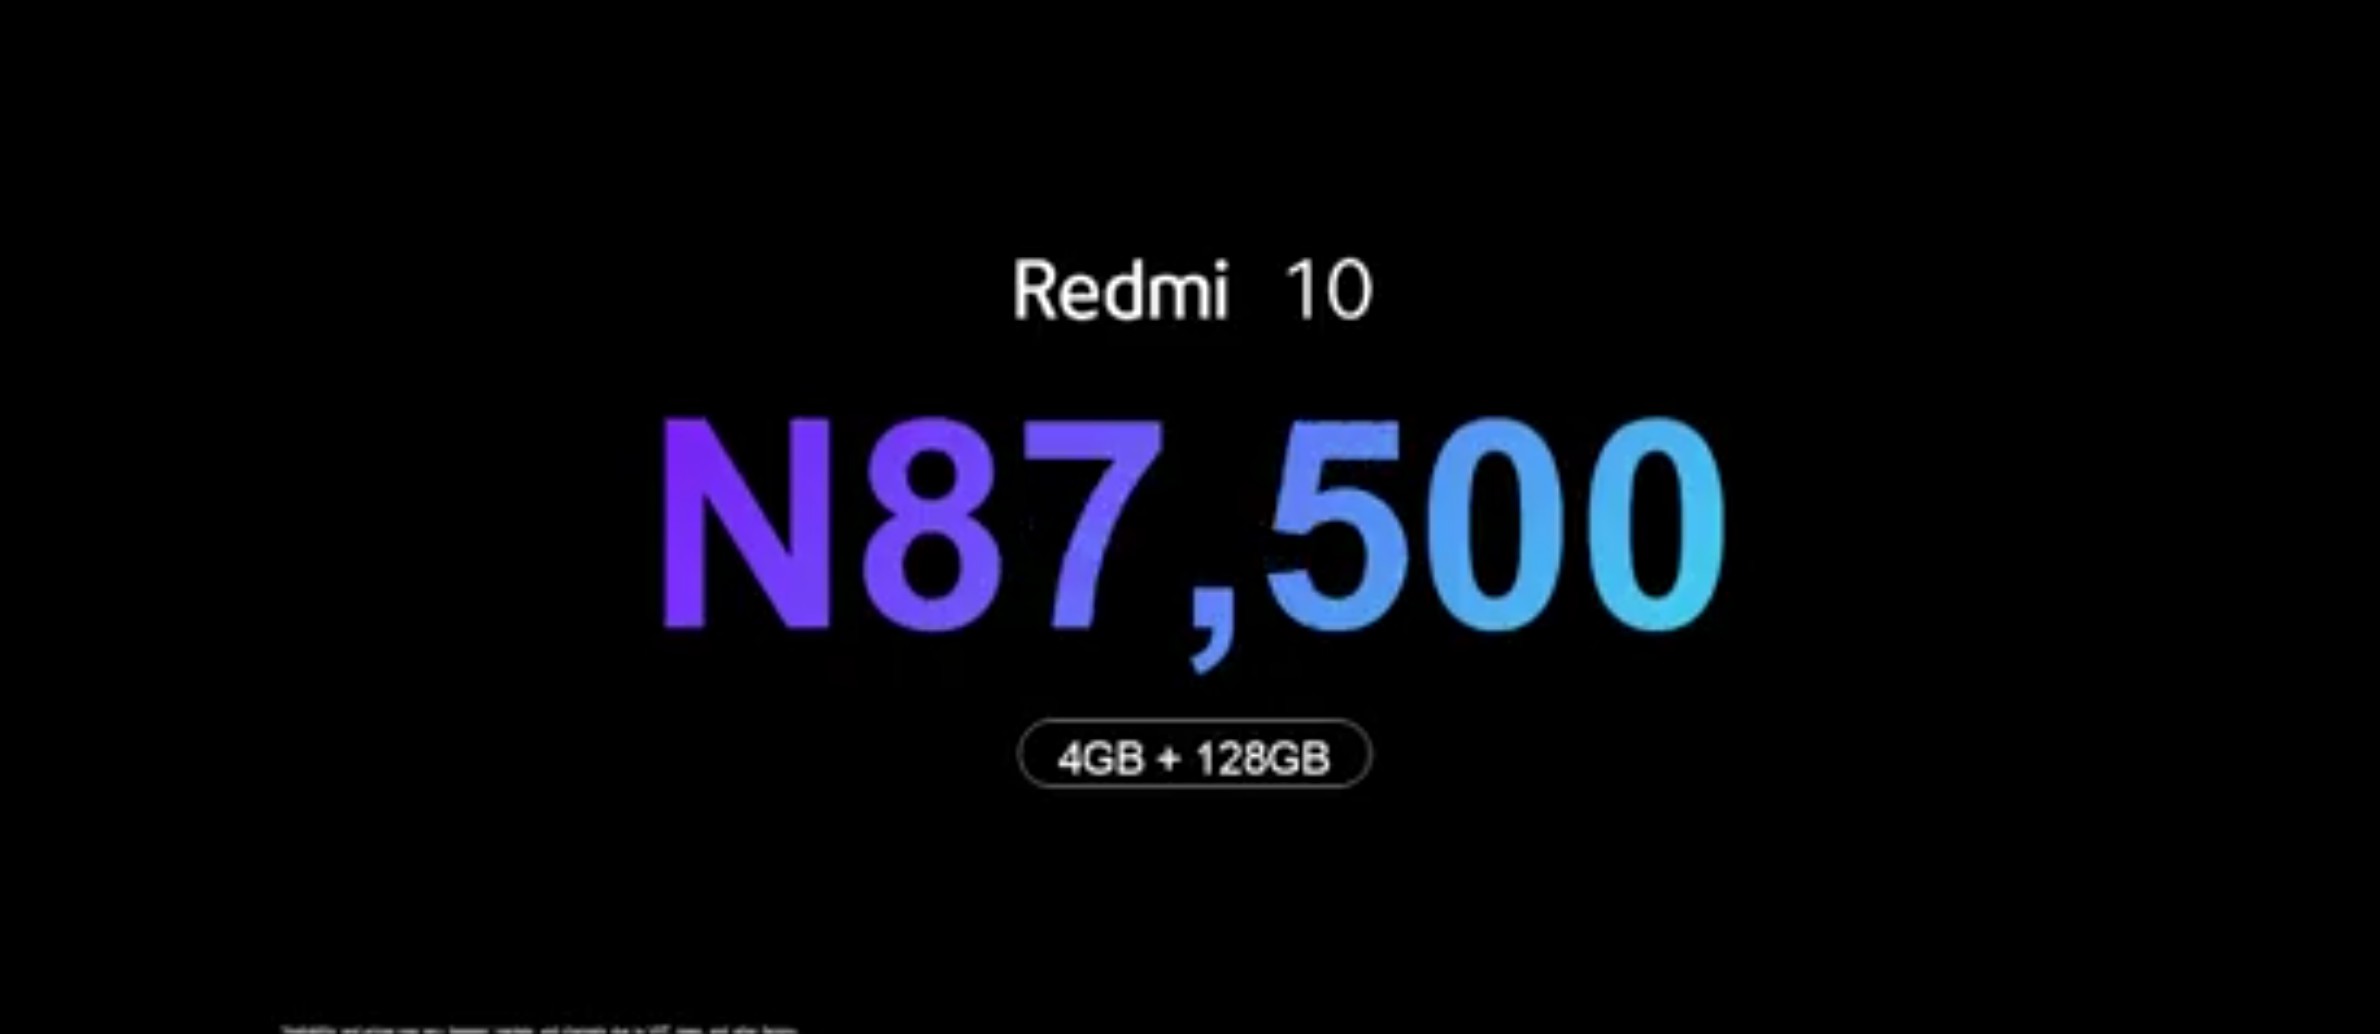 Redmi 10 with 50MP camera arrives in Nigeria beginning from N85,000 | DroidAfrica